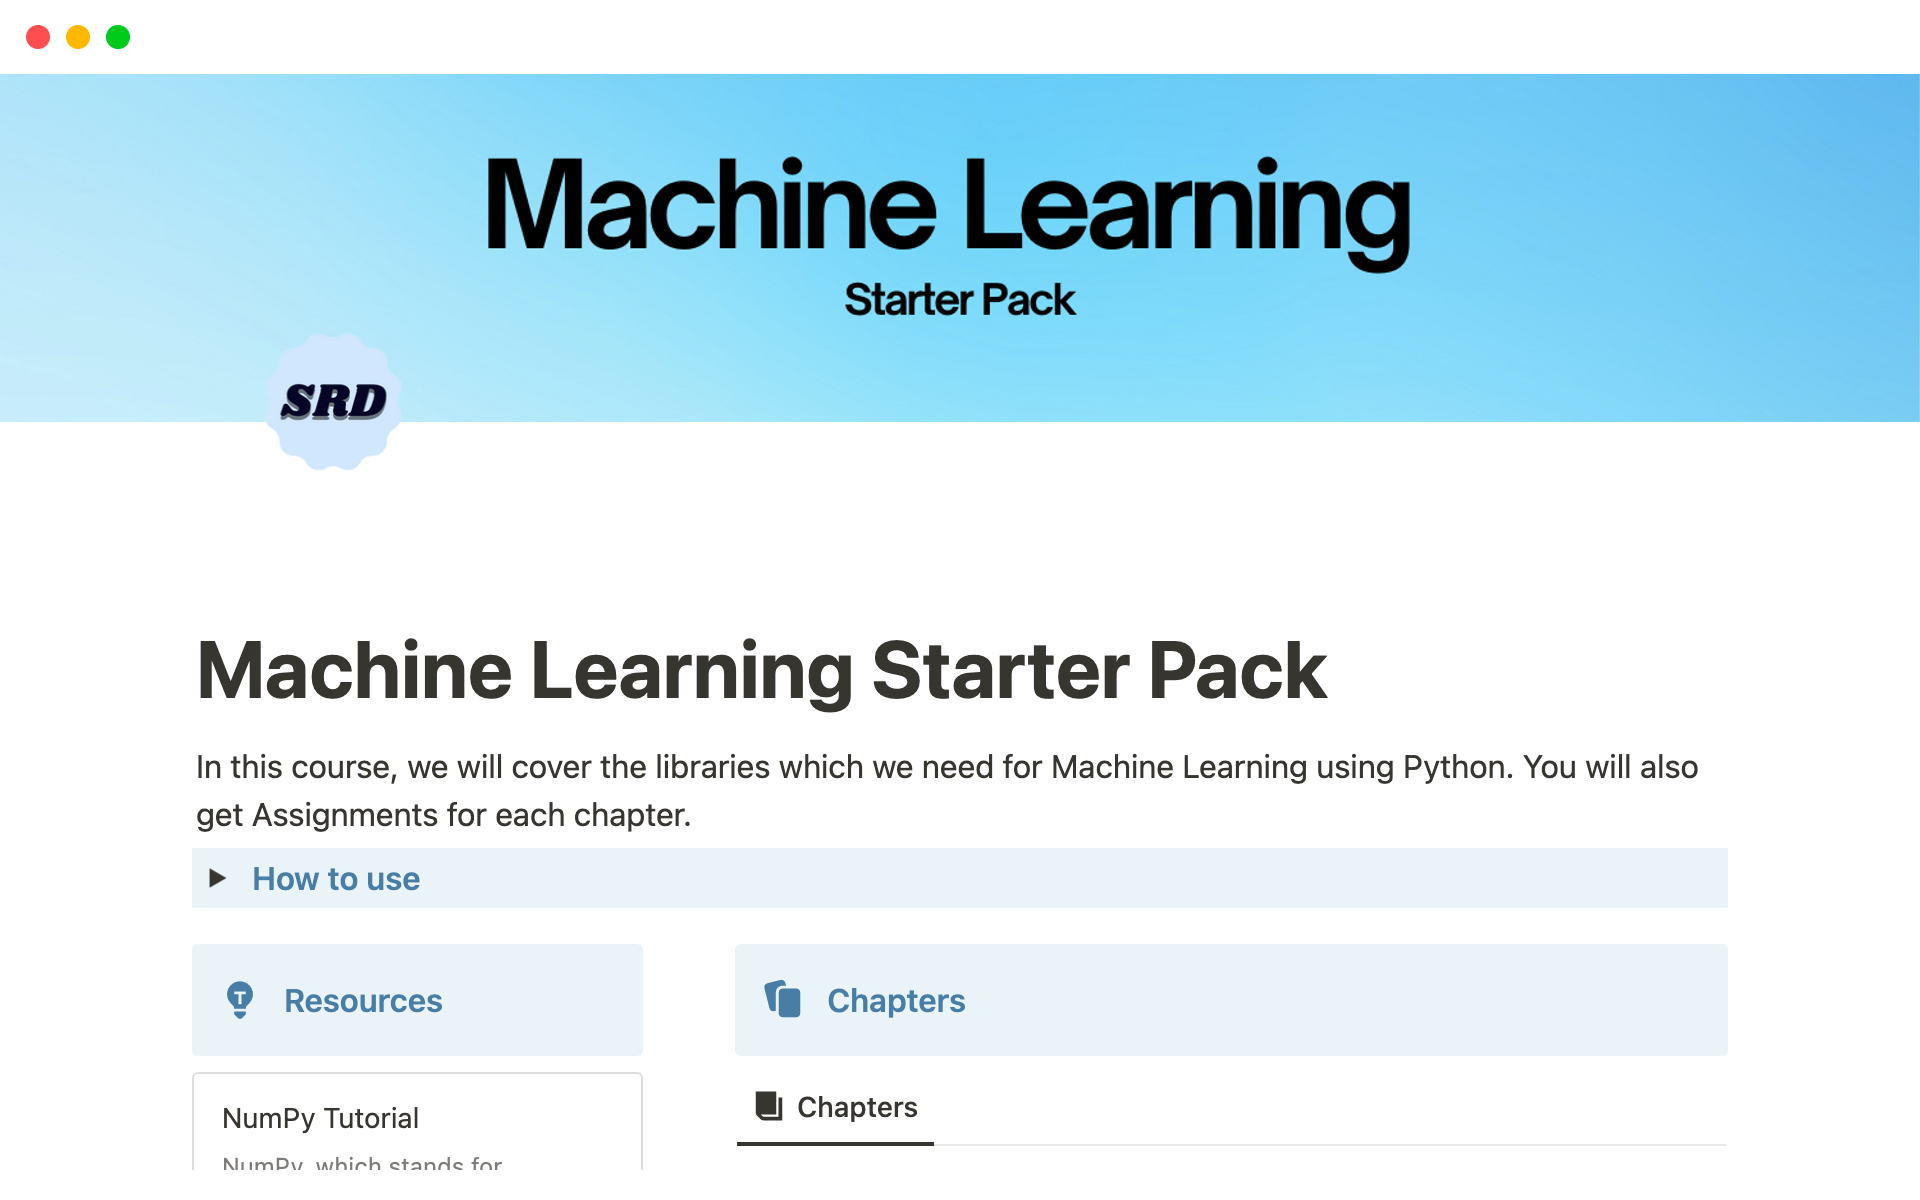 This Machine Learning Starter Pack course will cover the essential libraries and tools needed to begin Machine Learning using Python. 